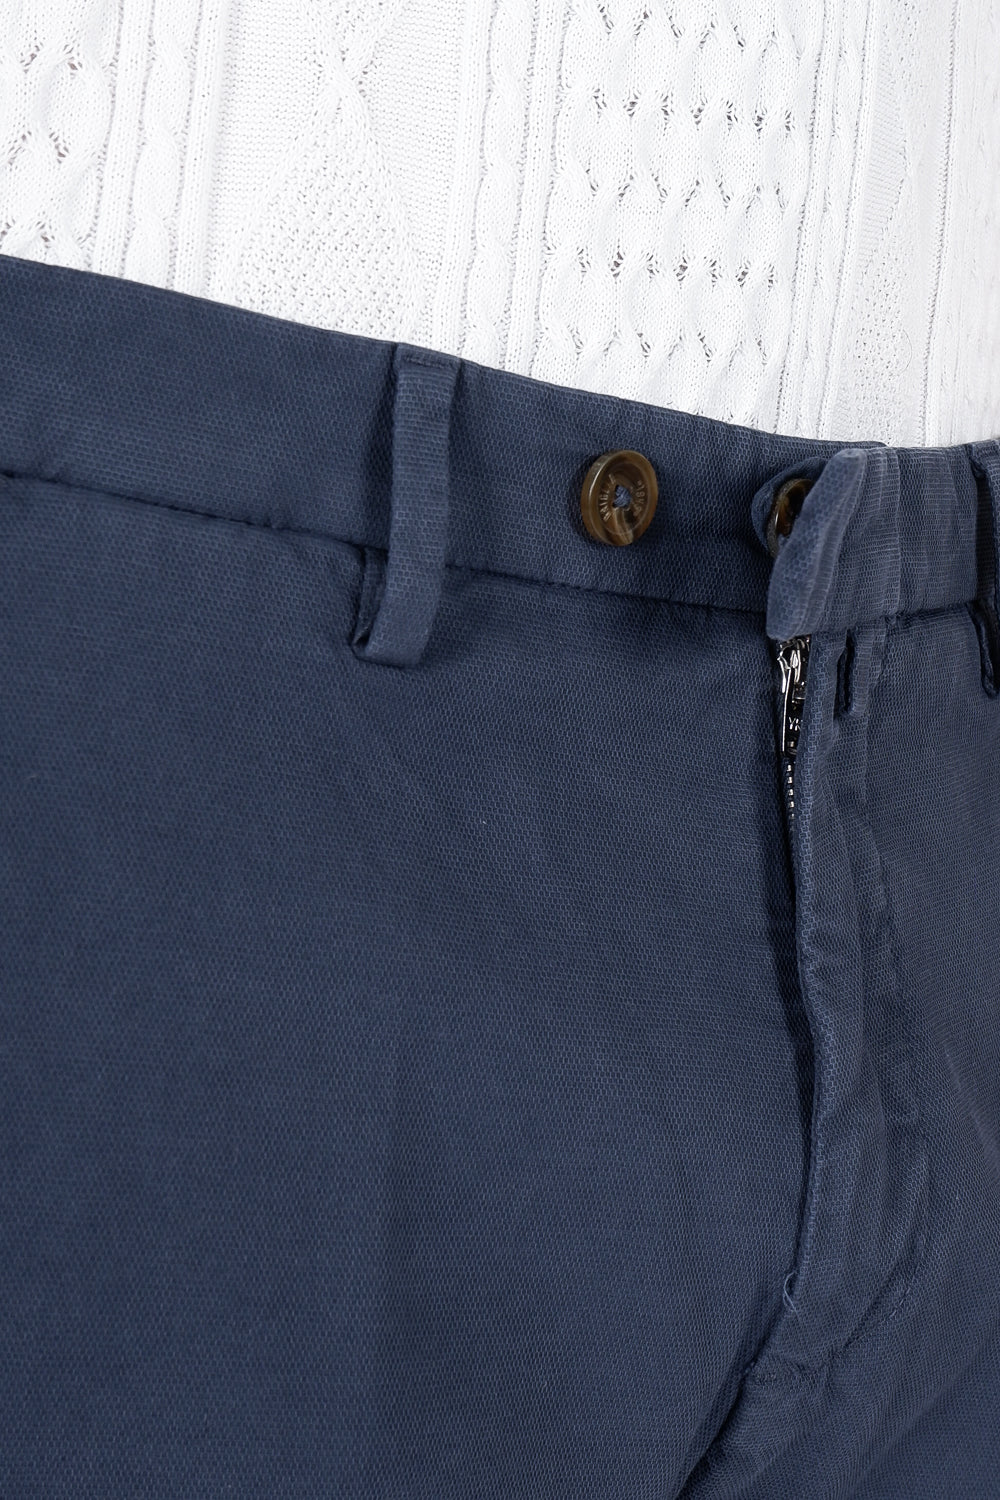 Buy the Briglia Italian Slim Fit Cotton Chino in Navy at Intro. Spend £50 for free UK delivery. Official stockists. We ship worldwide.